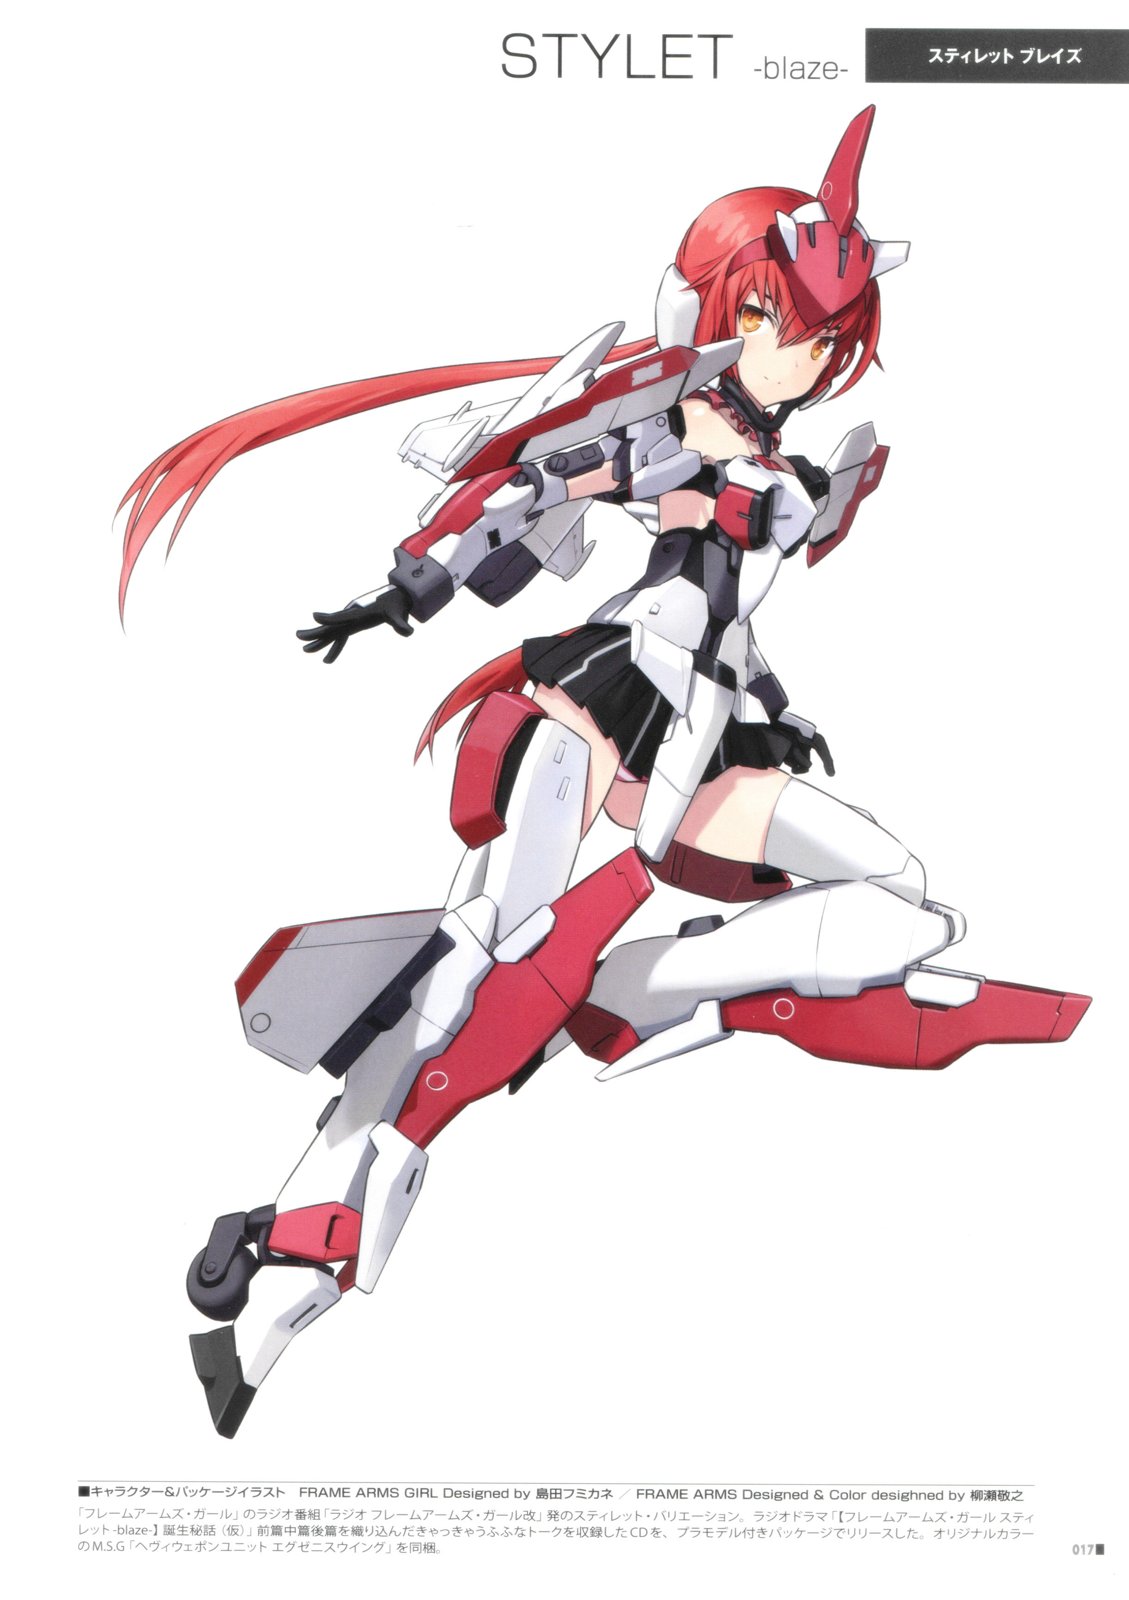 FRAME ARMS GIRL DESIGNERS NOTE - 全一卷(1/5) - 8